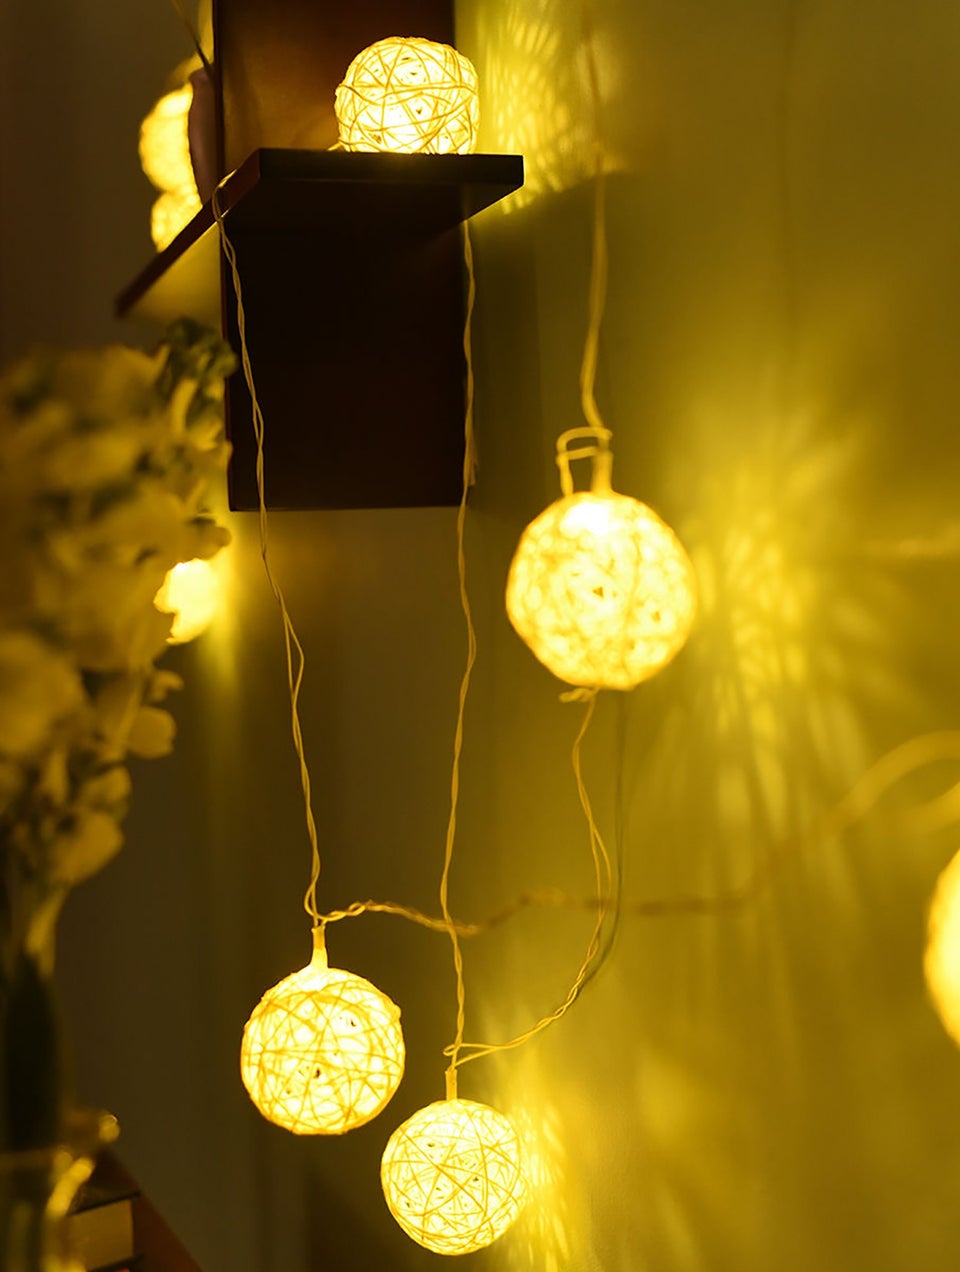 White Decorative Jute String Light In A Gift Box